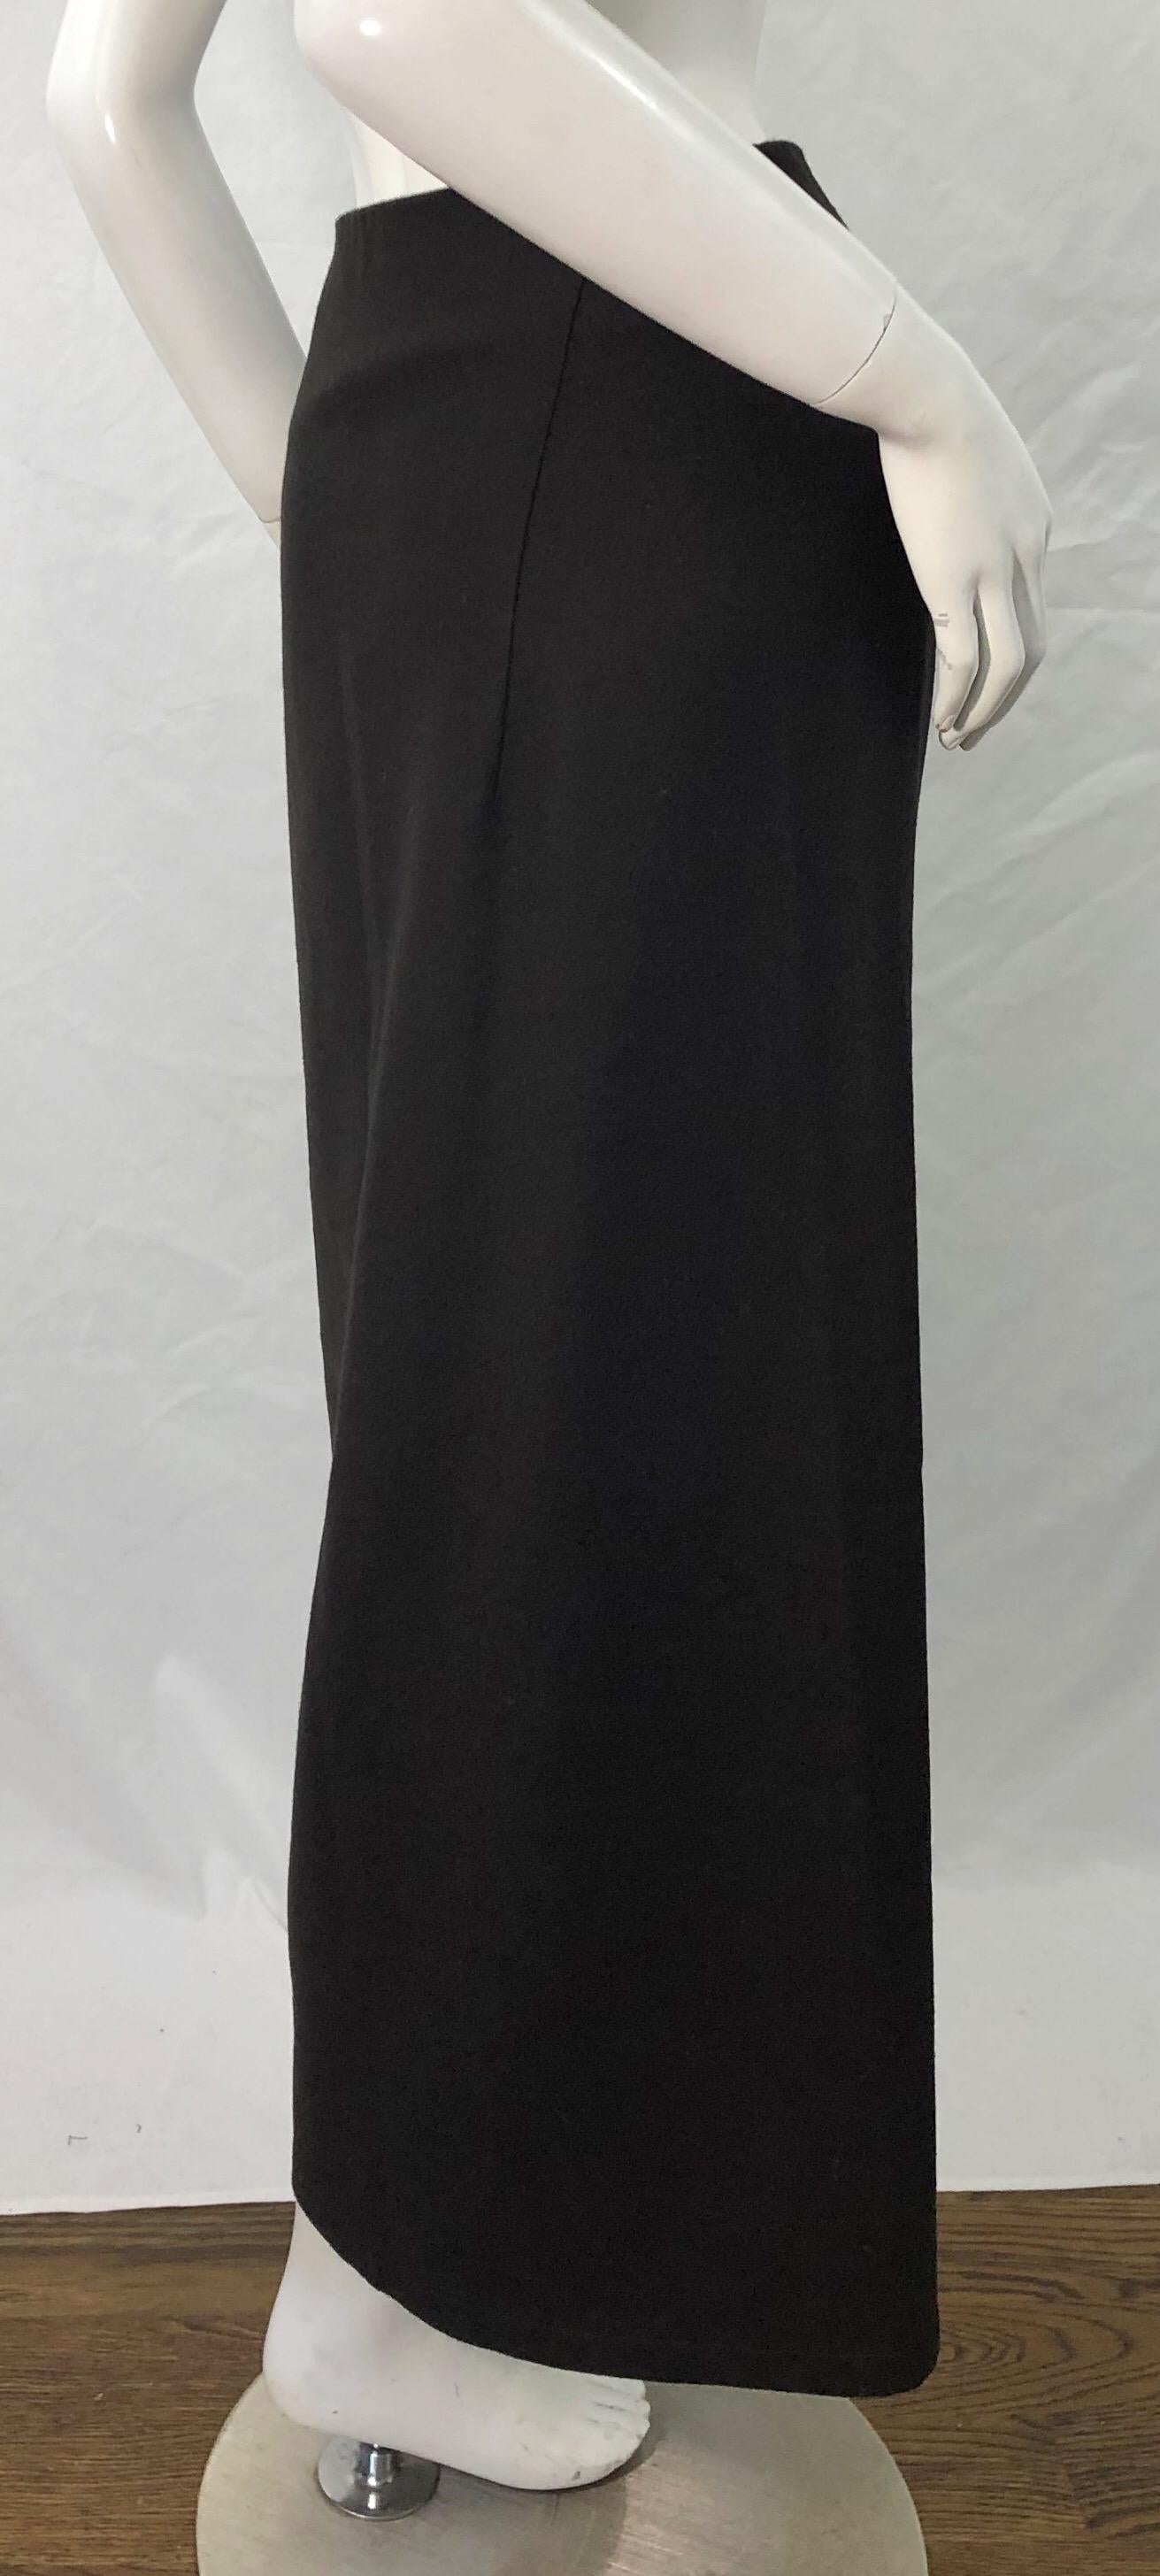 1990s Jil Sander Chocolate Brown Sz 36 / 4-6 Minimalist Vintage 90s Midi Skirt  In Excellent Condition For Sale In San Diego, CA